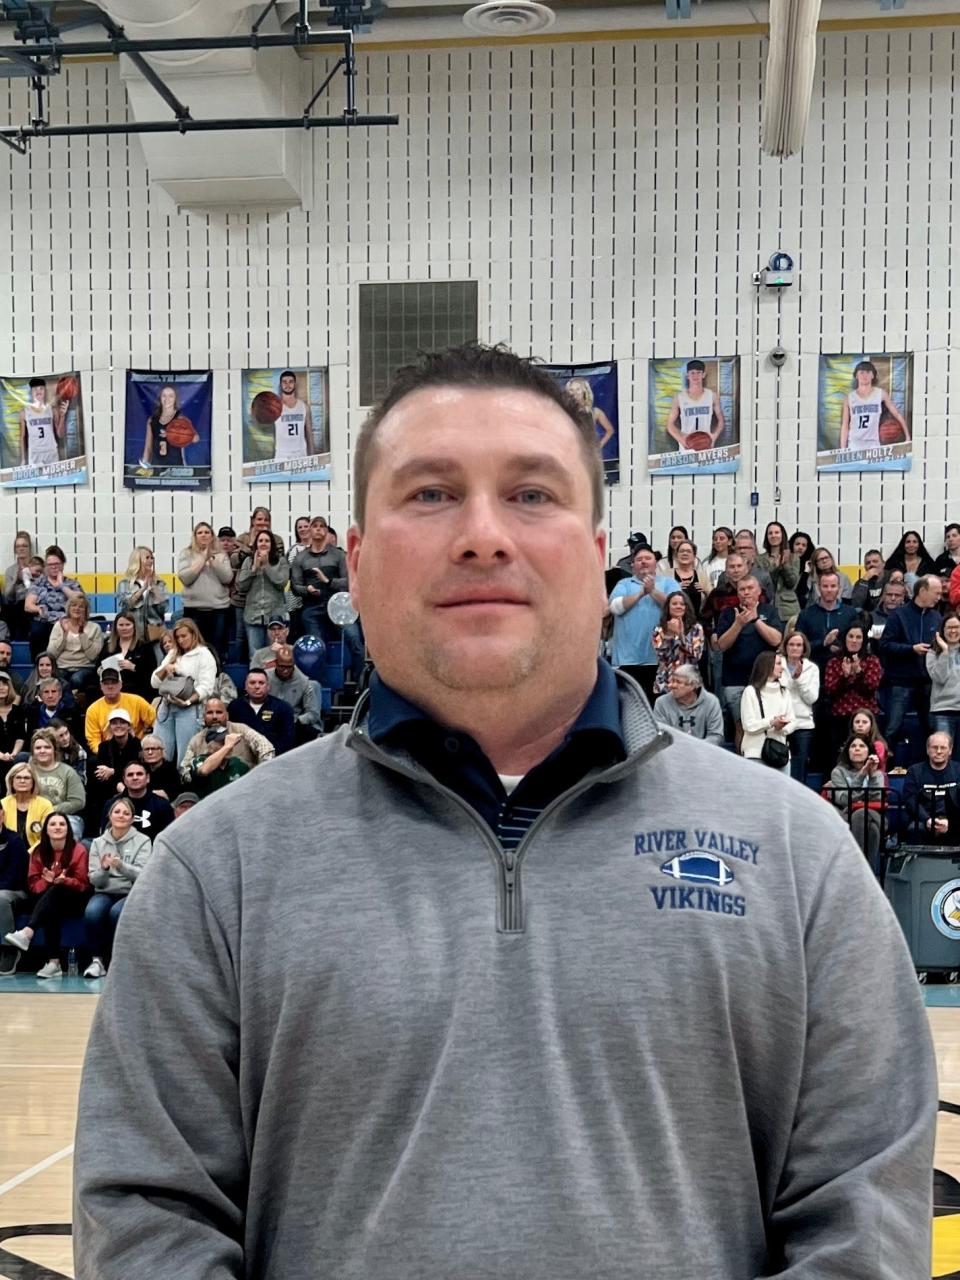 Matt Waddell is the new head football coach at River Valley after serving as an assistant on the previous staff led by Doug Green who retired.